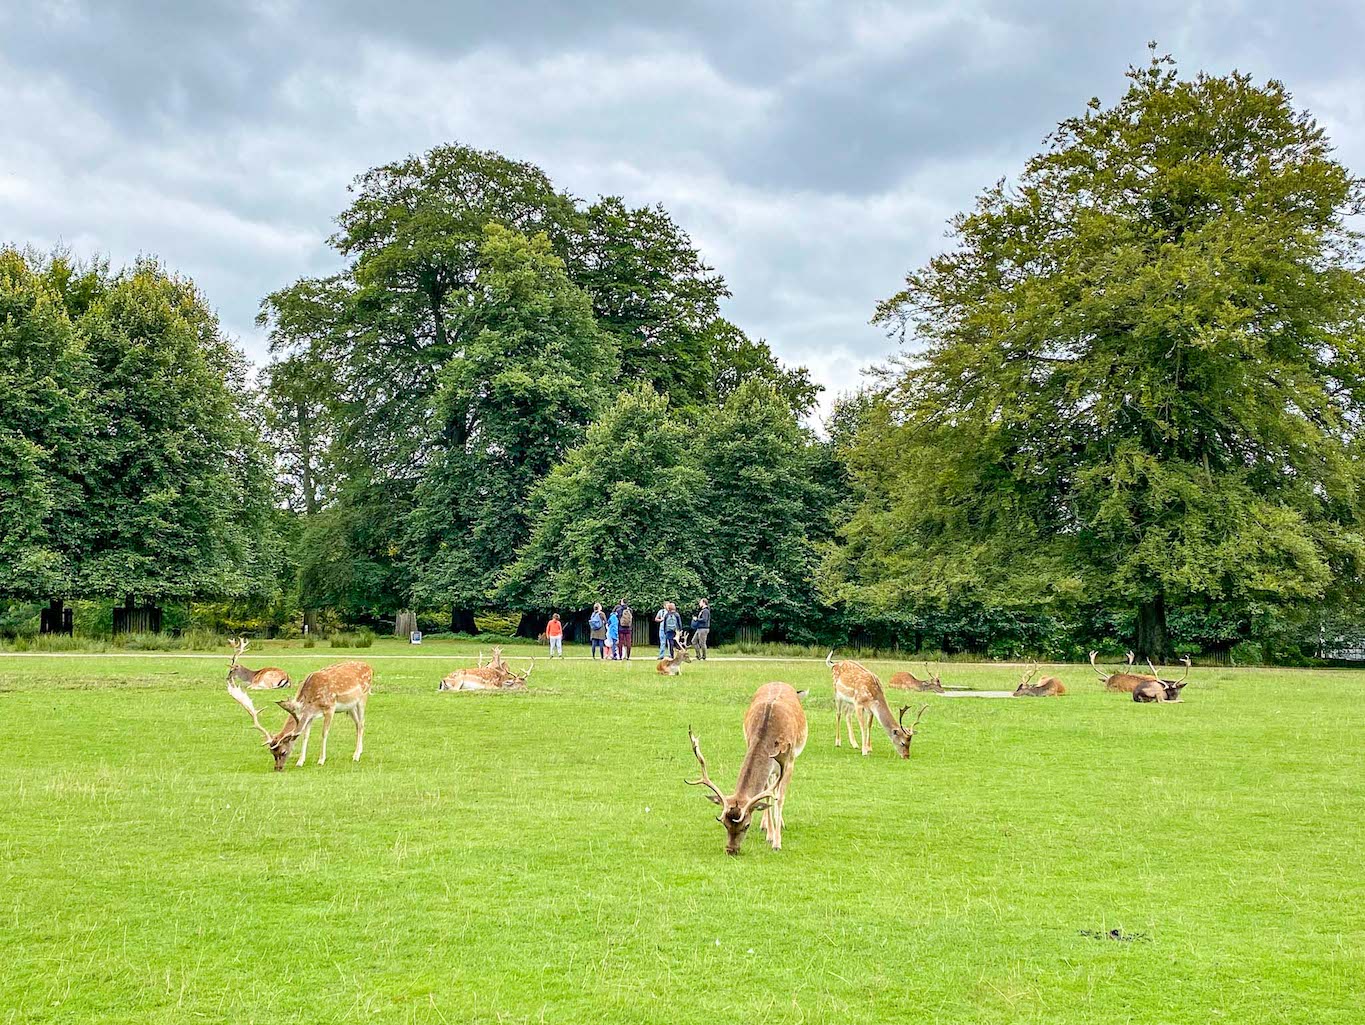 Things to do in Altrincham, Dunham Massey Deer in the park